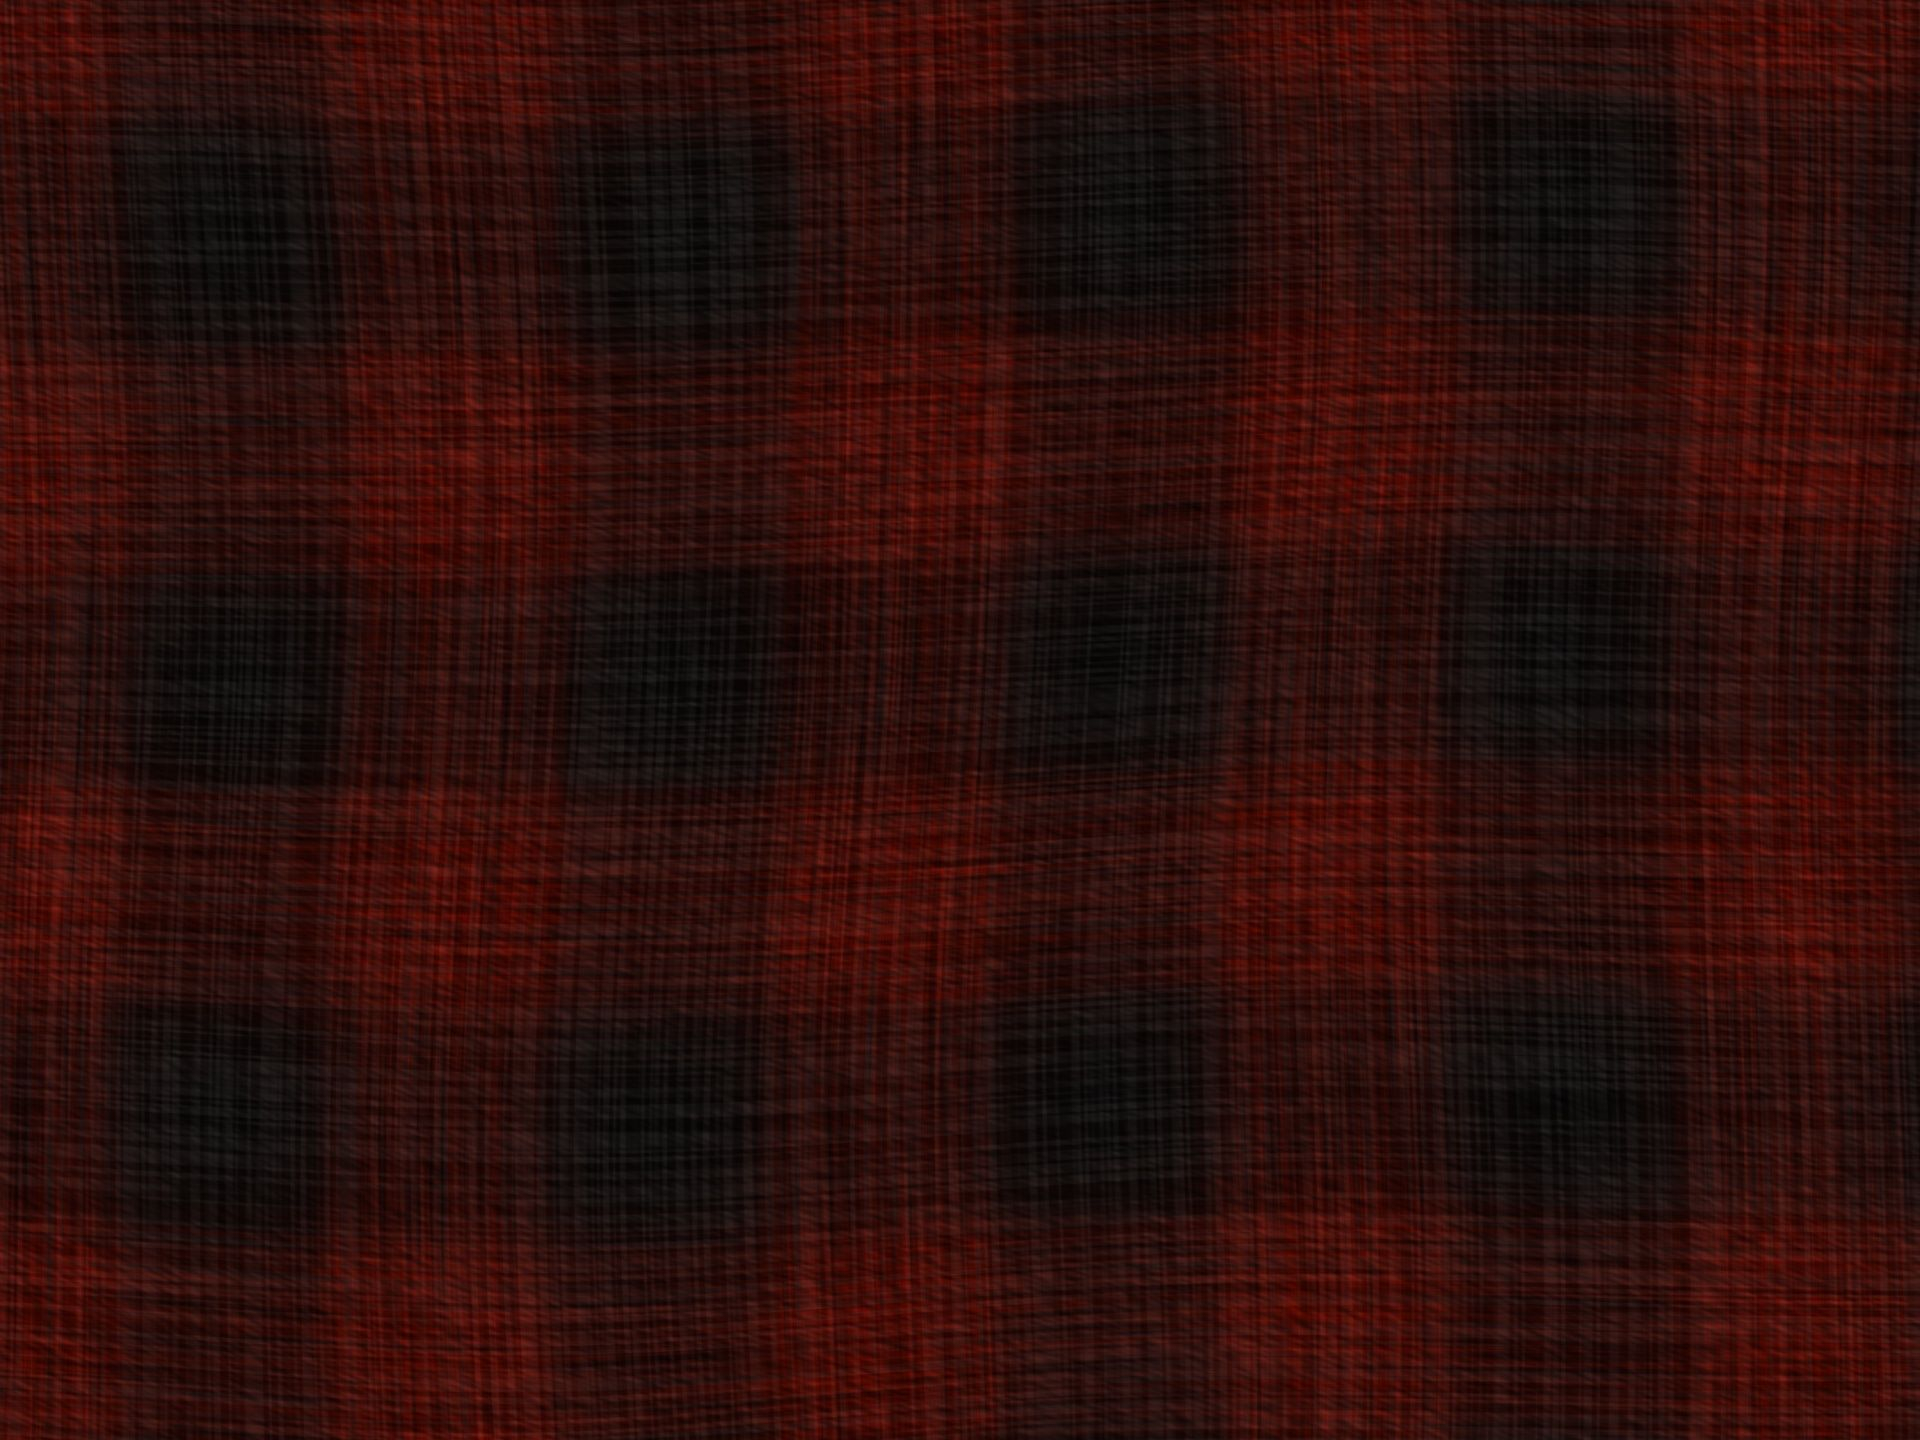 1920x1440 Black and Red Plaid Wallpapers Top Free Black and Red Plaid Backgrounds